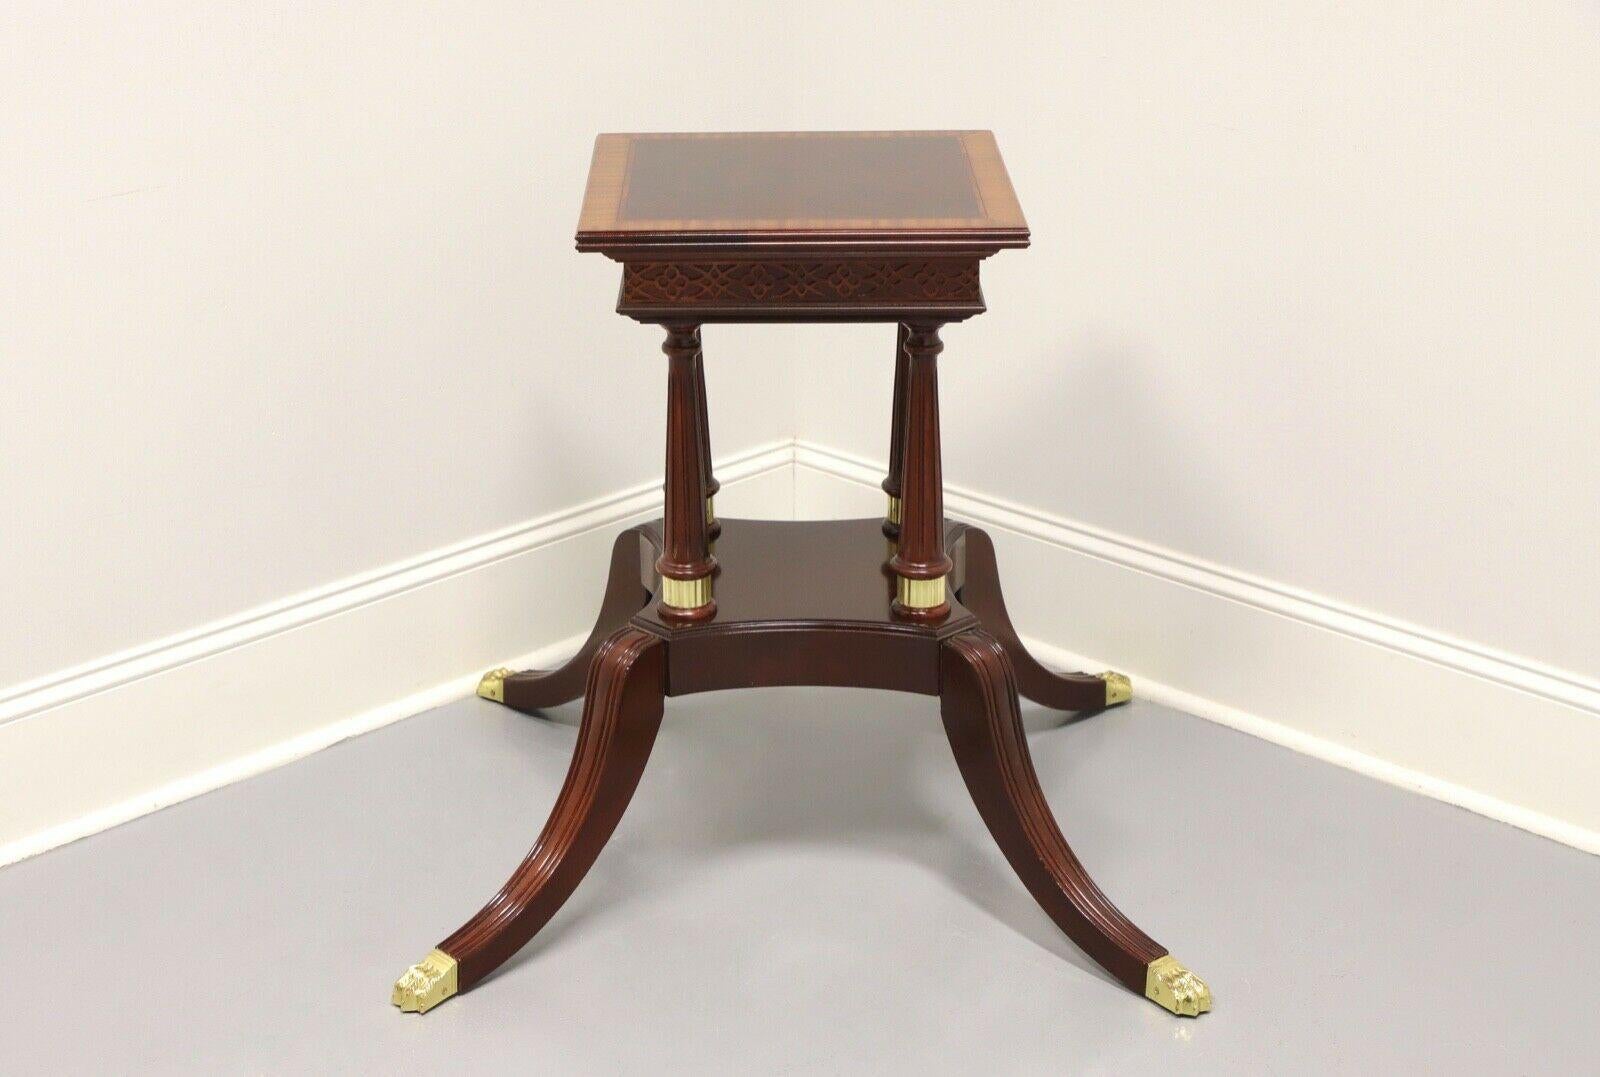 A Regency style table pedestal base by Craftique of Mebane, North Carolina, USA. Solid mahogany with banding on top. Birdcage pedestal of four fluted columns on square base plate supported by four sweep legs with brass toe caps. Ready for your style